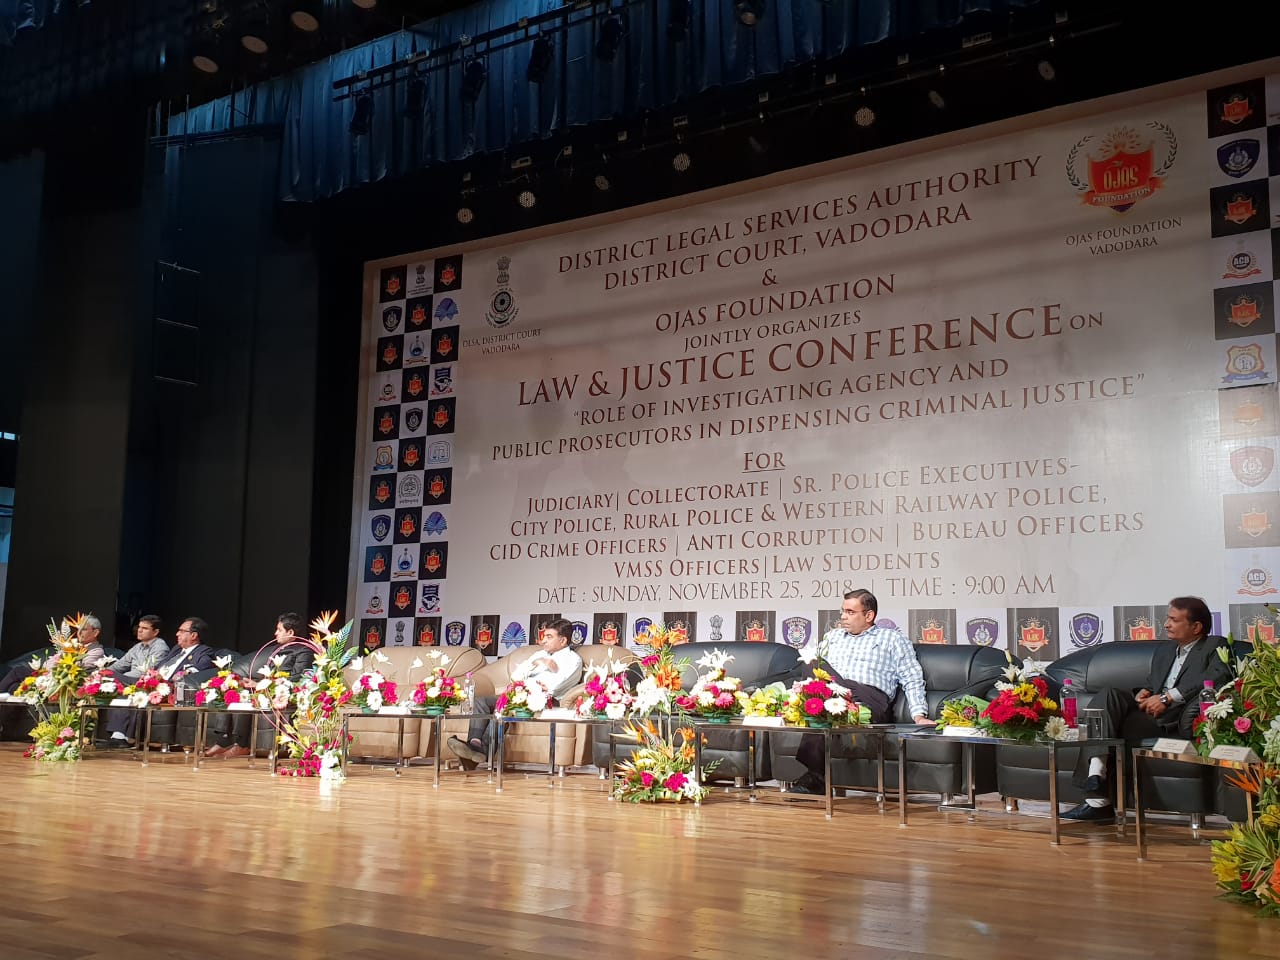 Ojas Foundation, District Legal Services Authority, District Court, Vadodara jointly organizes Law & Justice Conference